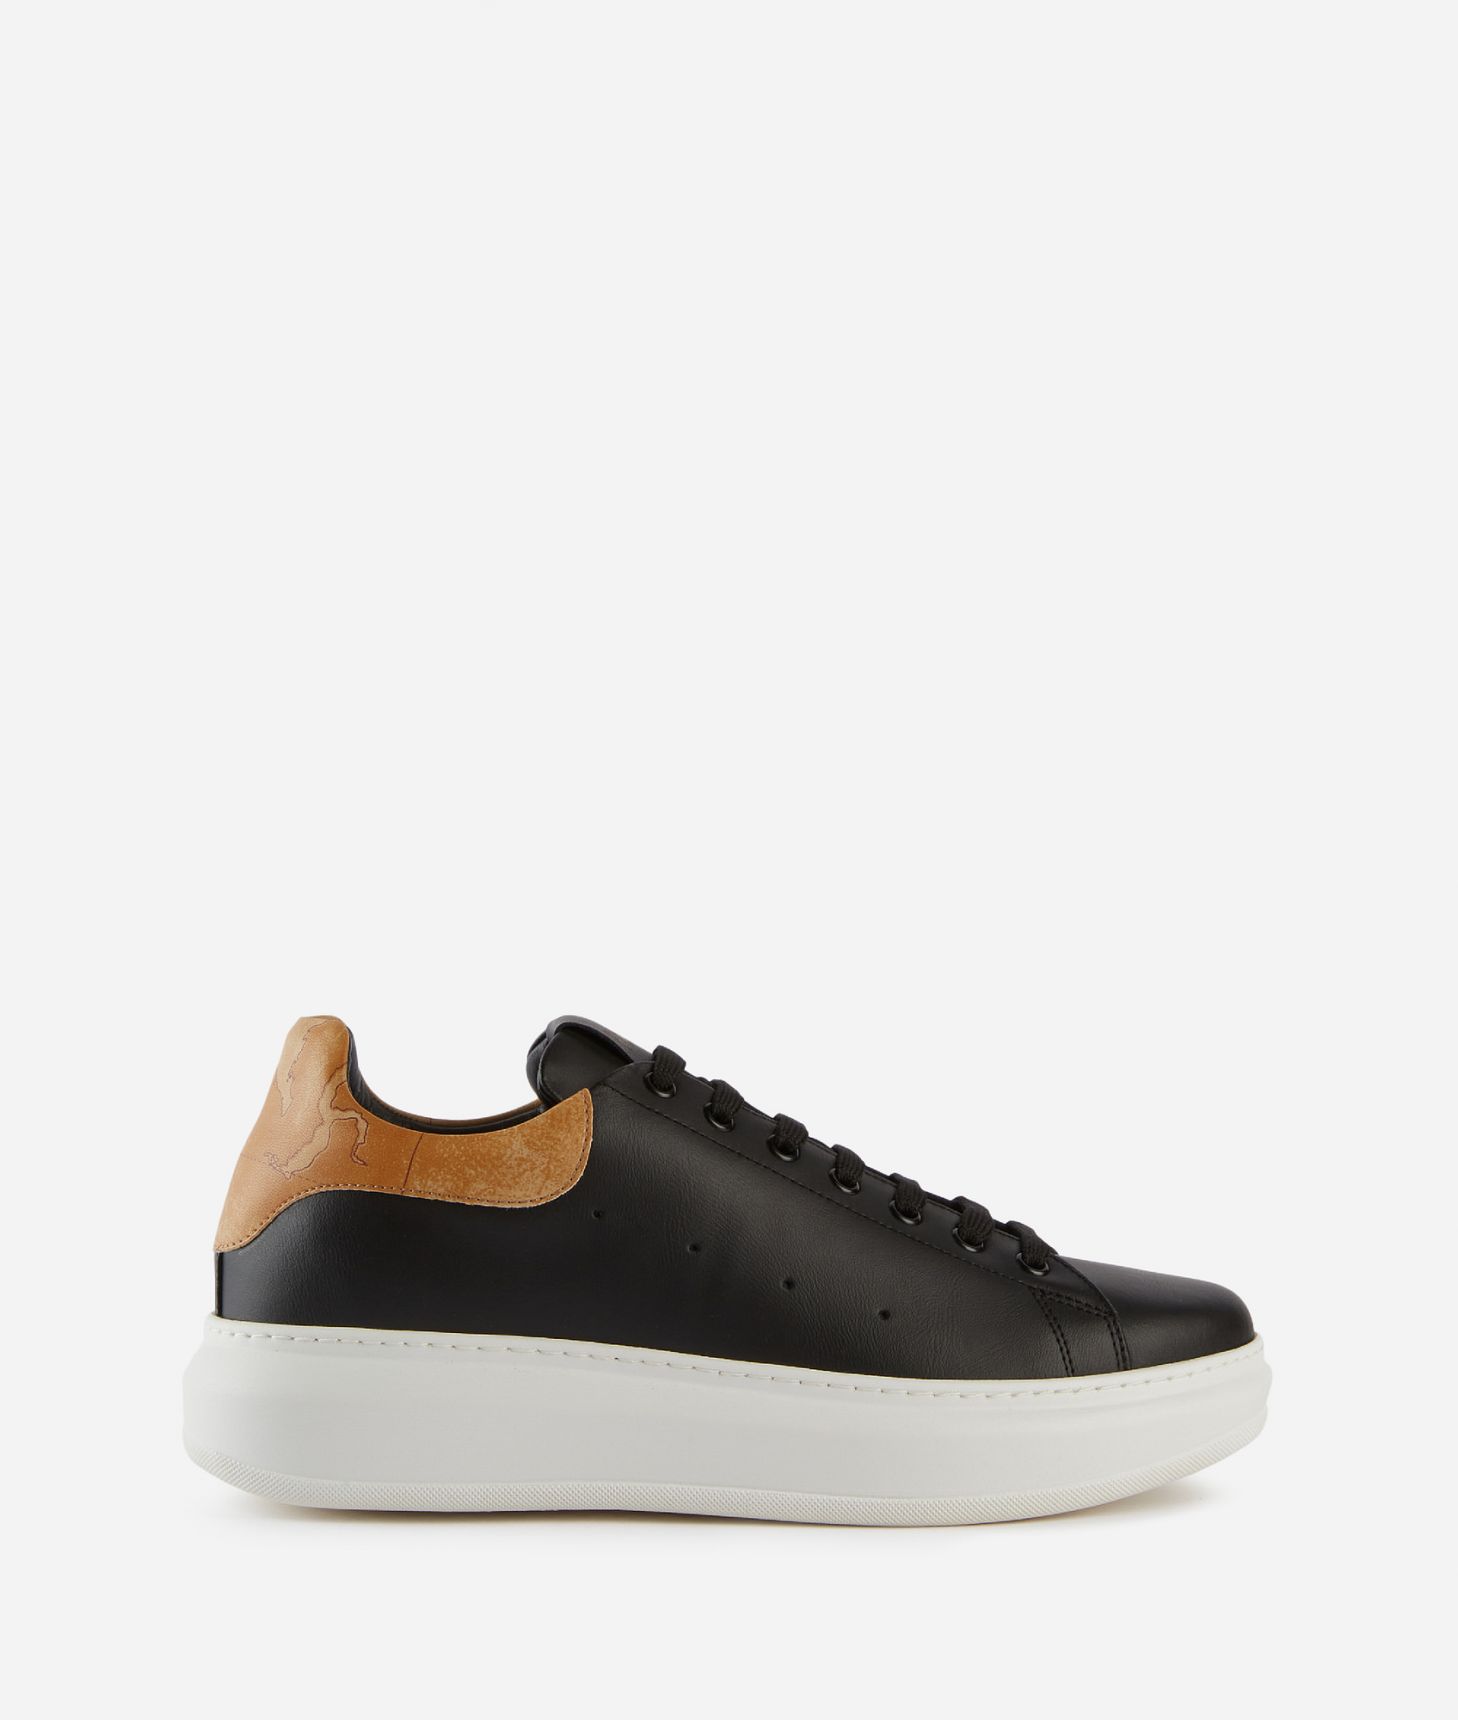 Sneakers in pelle liscia Nere,front